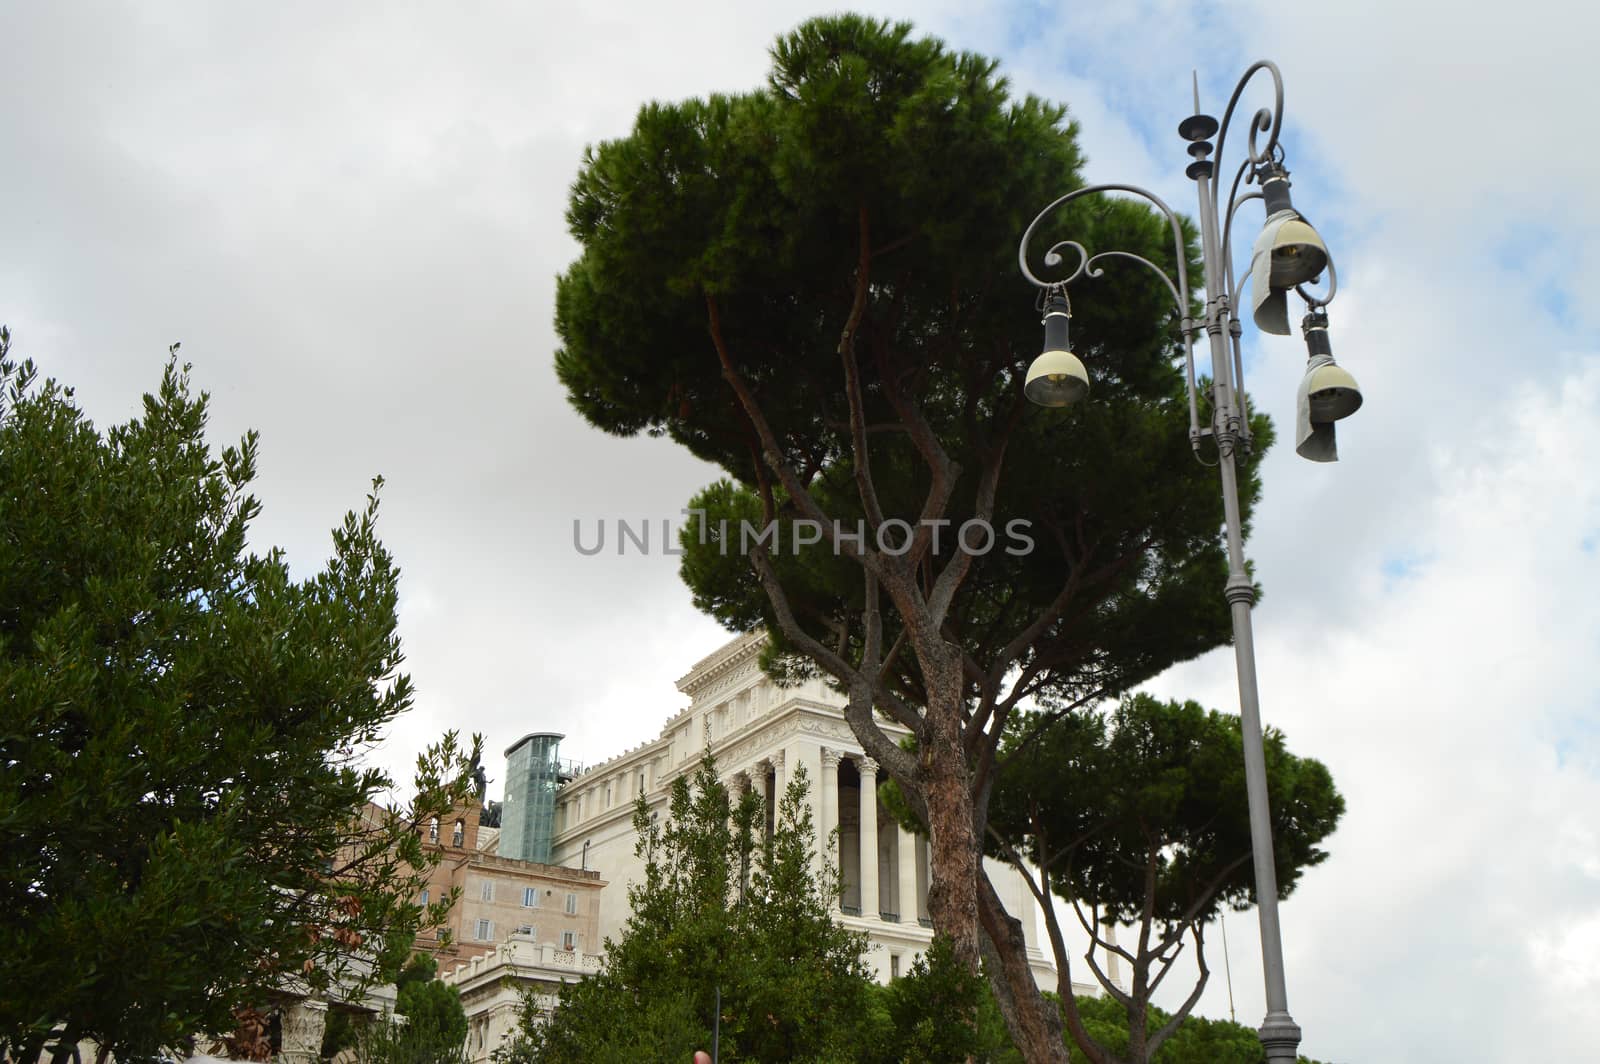 Rome, Lazio region, Italy, Detail of the national monument of Vittorio Emanuele II, named Vittoriano or Altare della Patria. View from sea pines, October 7, 2018 by claire_lucia